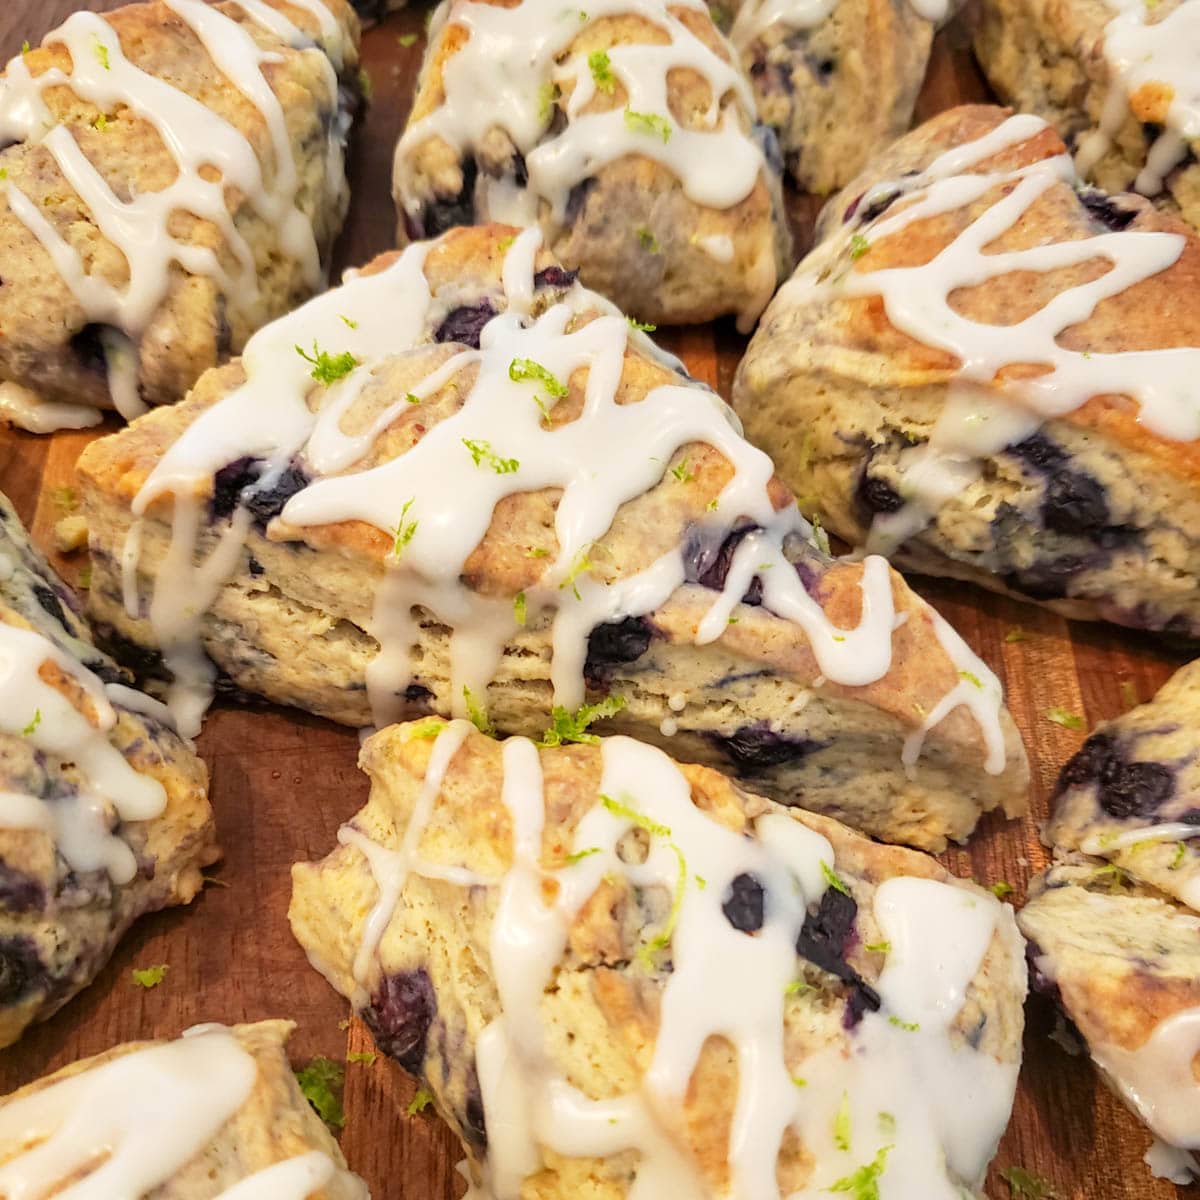 Blueberry lime scones drizzled with icing on a dark cutting board